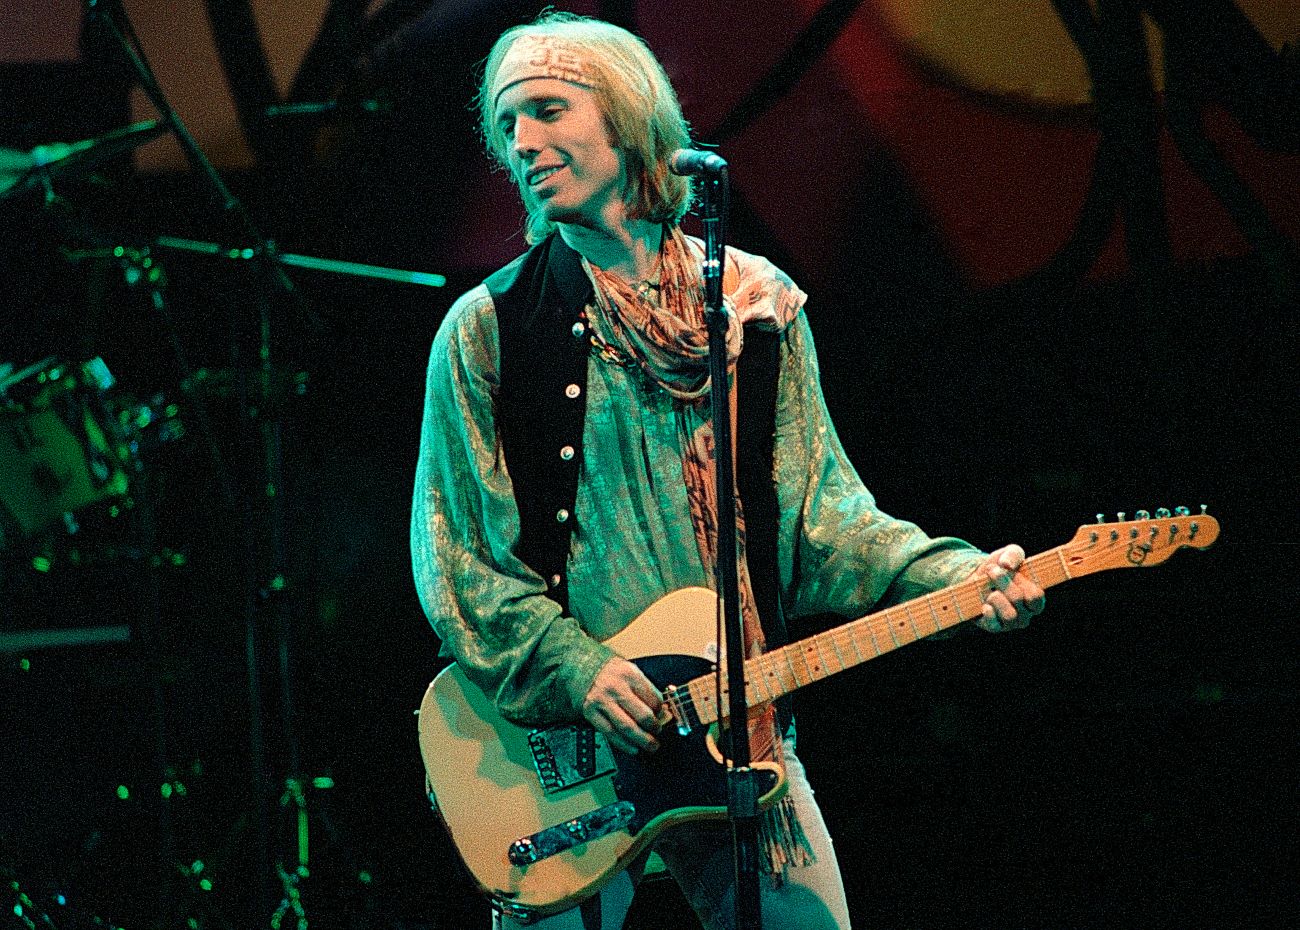 Tom Petty wears a green shirt and plays the guitar. He is standing in front of a microphone.